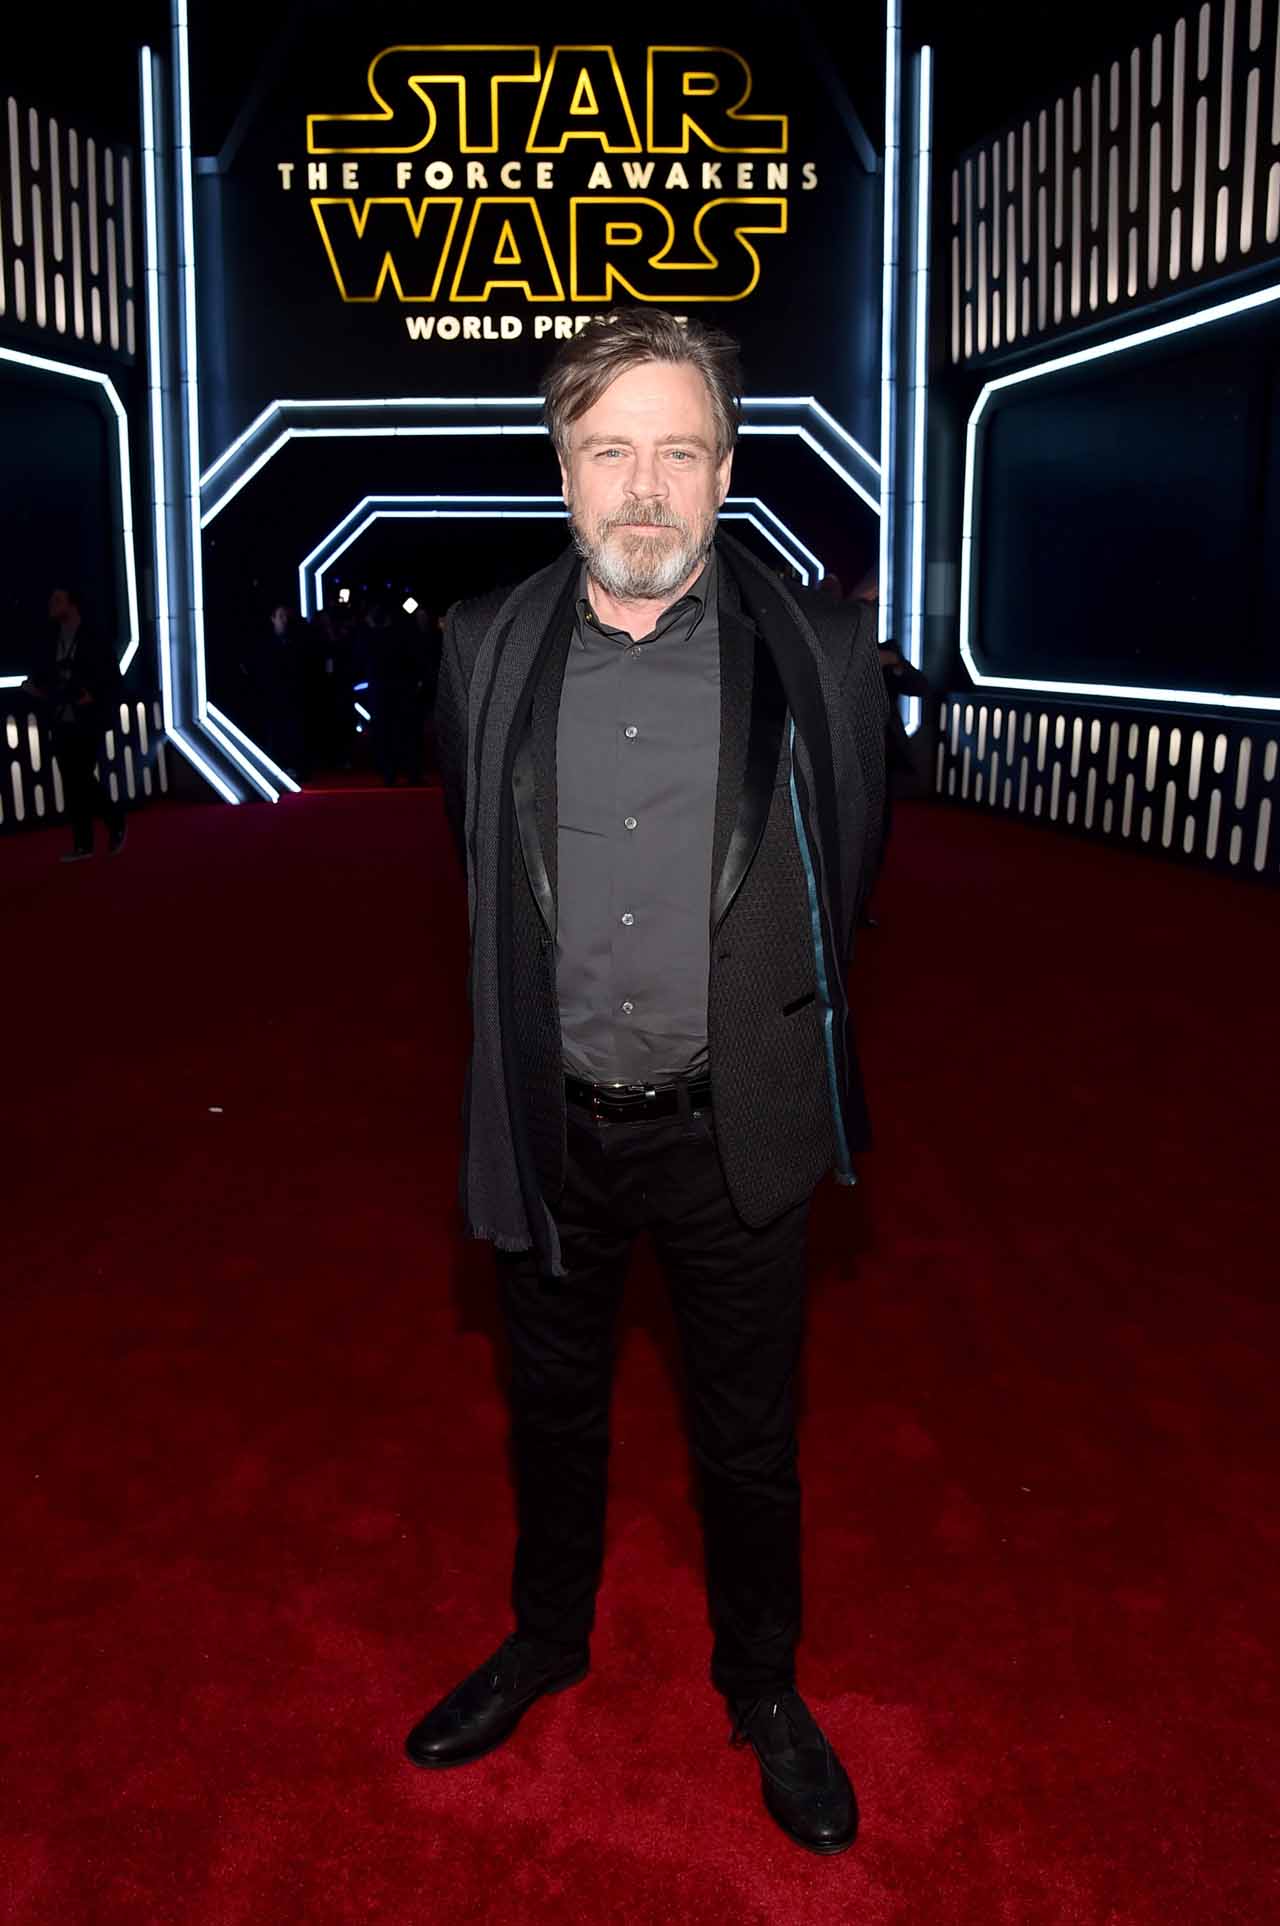 HOLLYWOOD, CA - DECEMBER 14:  Actor Mark Hamill attends the World Premiere of ?Star Wars: The Force Awakens? at the Dolby, El Capitan, and TCL Theatres on December 14, 2015 in Hollywood, California.  (Photo by Alberto E. Rodriguez/Getty Images for Disney) *** Local Caption *** Mark Hamill